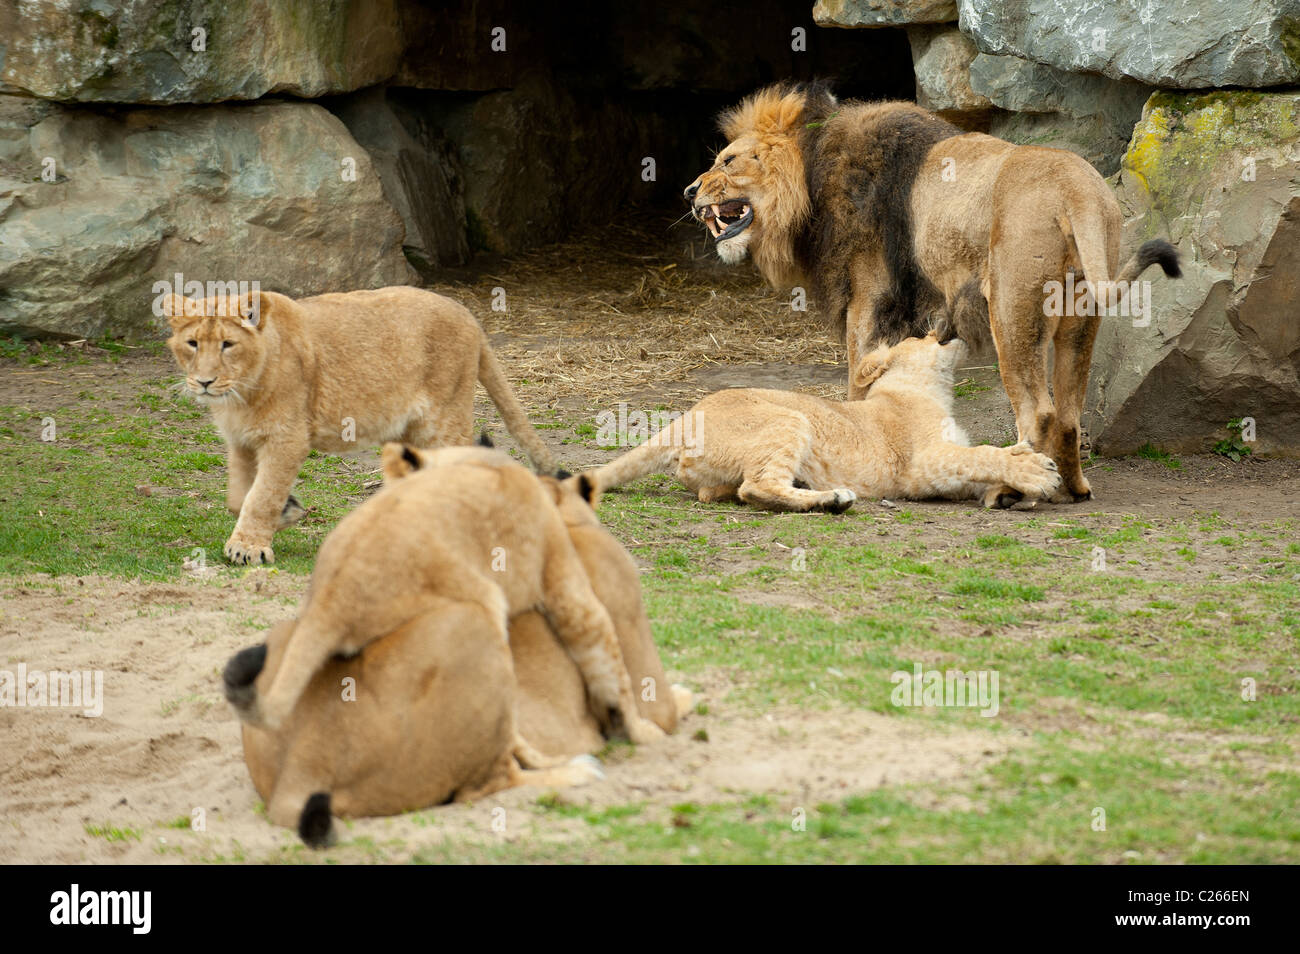 Lions playing in the zoo Stock Photo